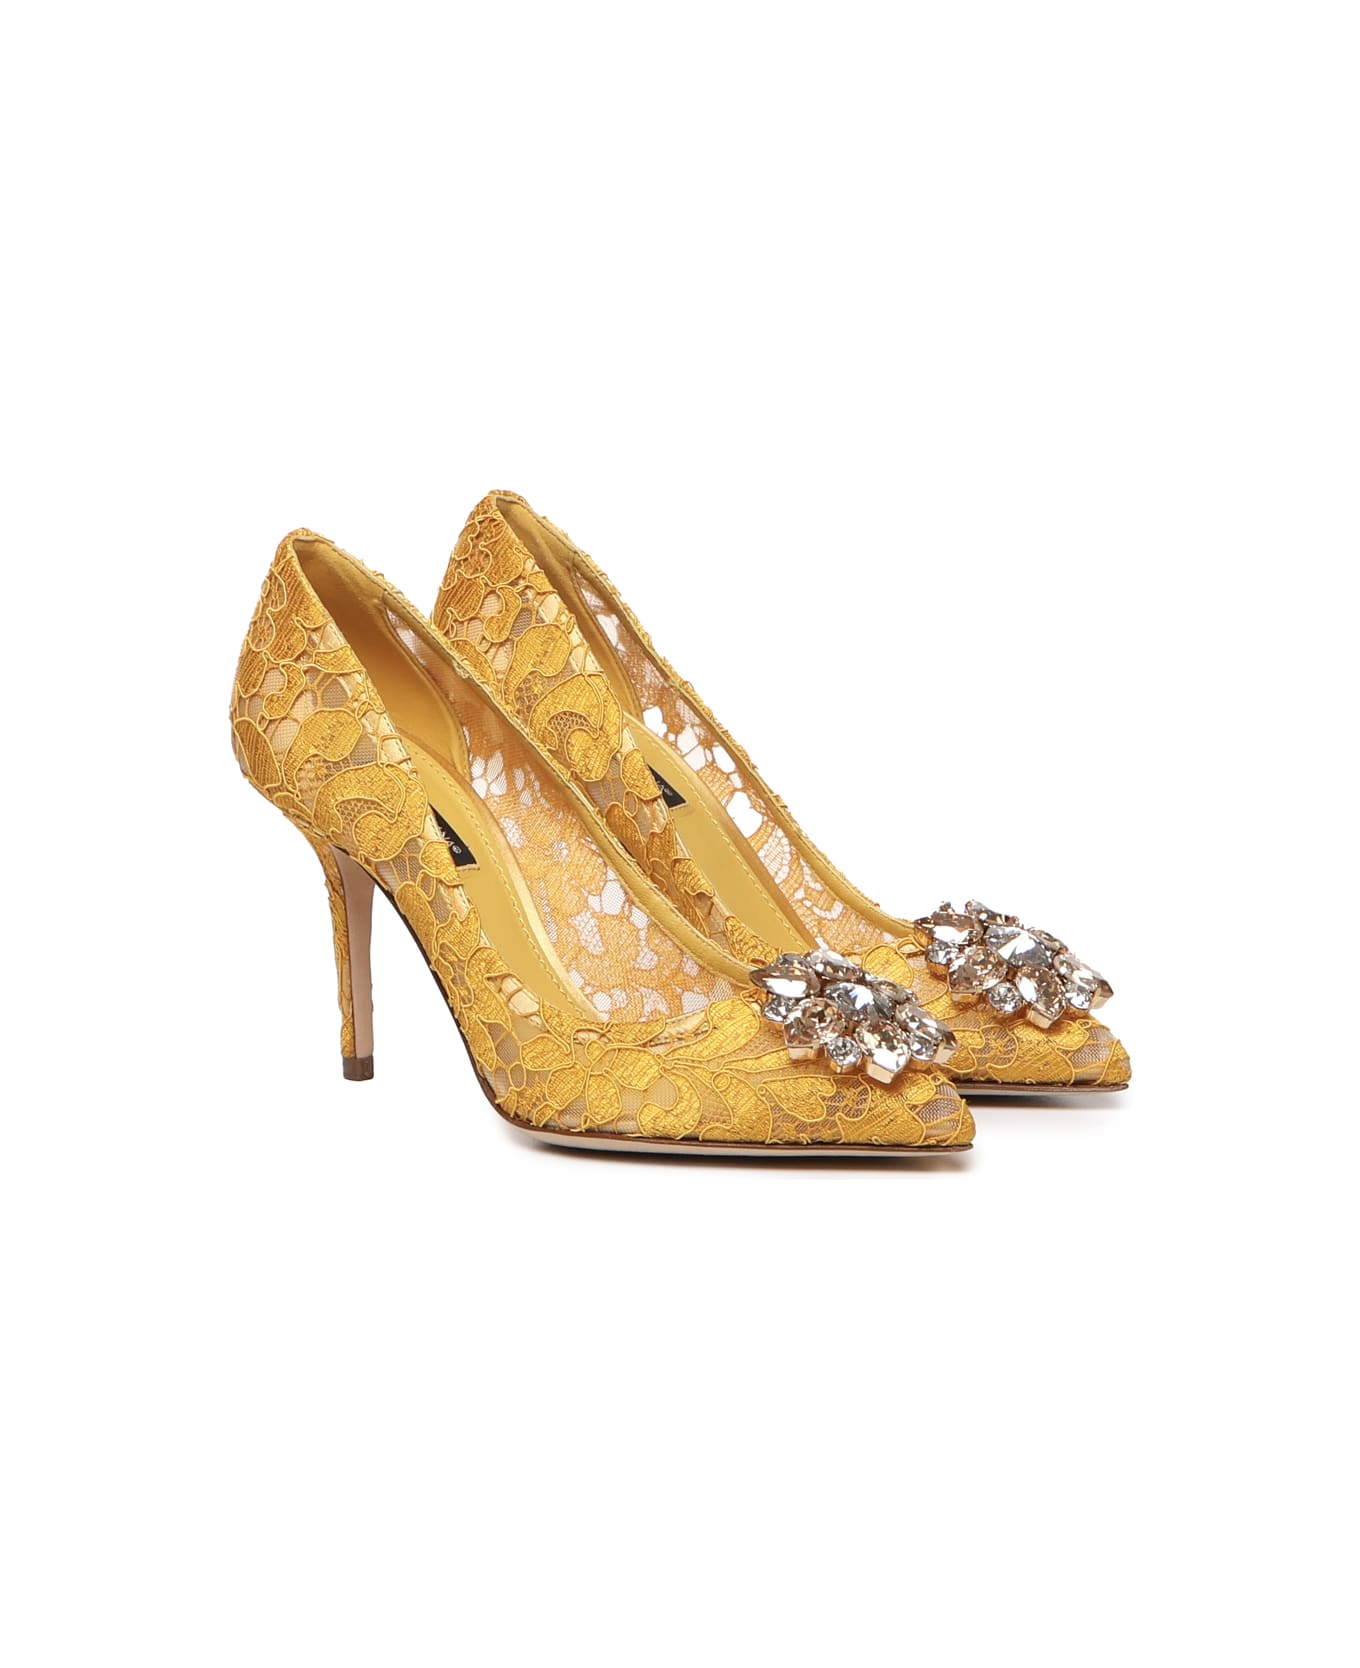 Dolce & Gabbana Bellucci Taormina Lace Pumps With Crystals - Mustard